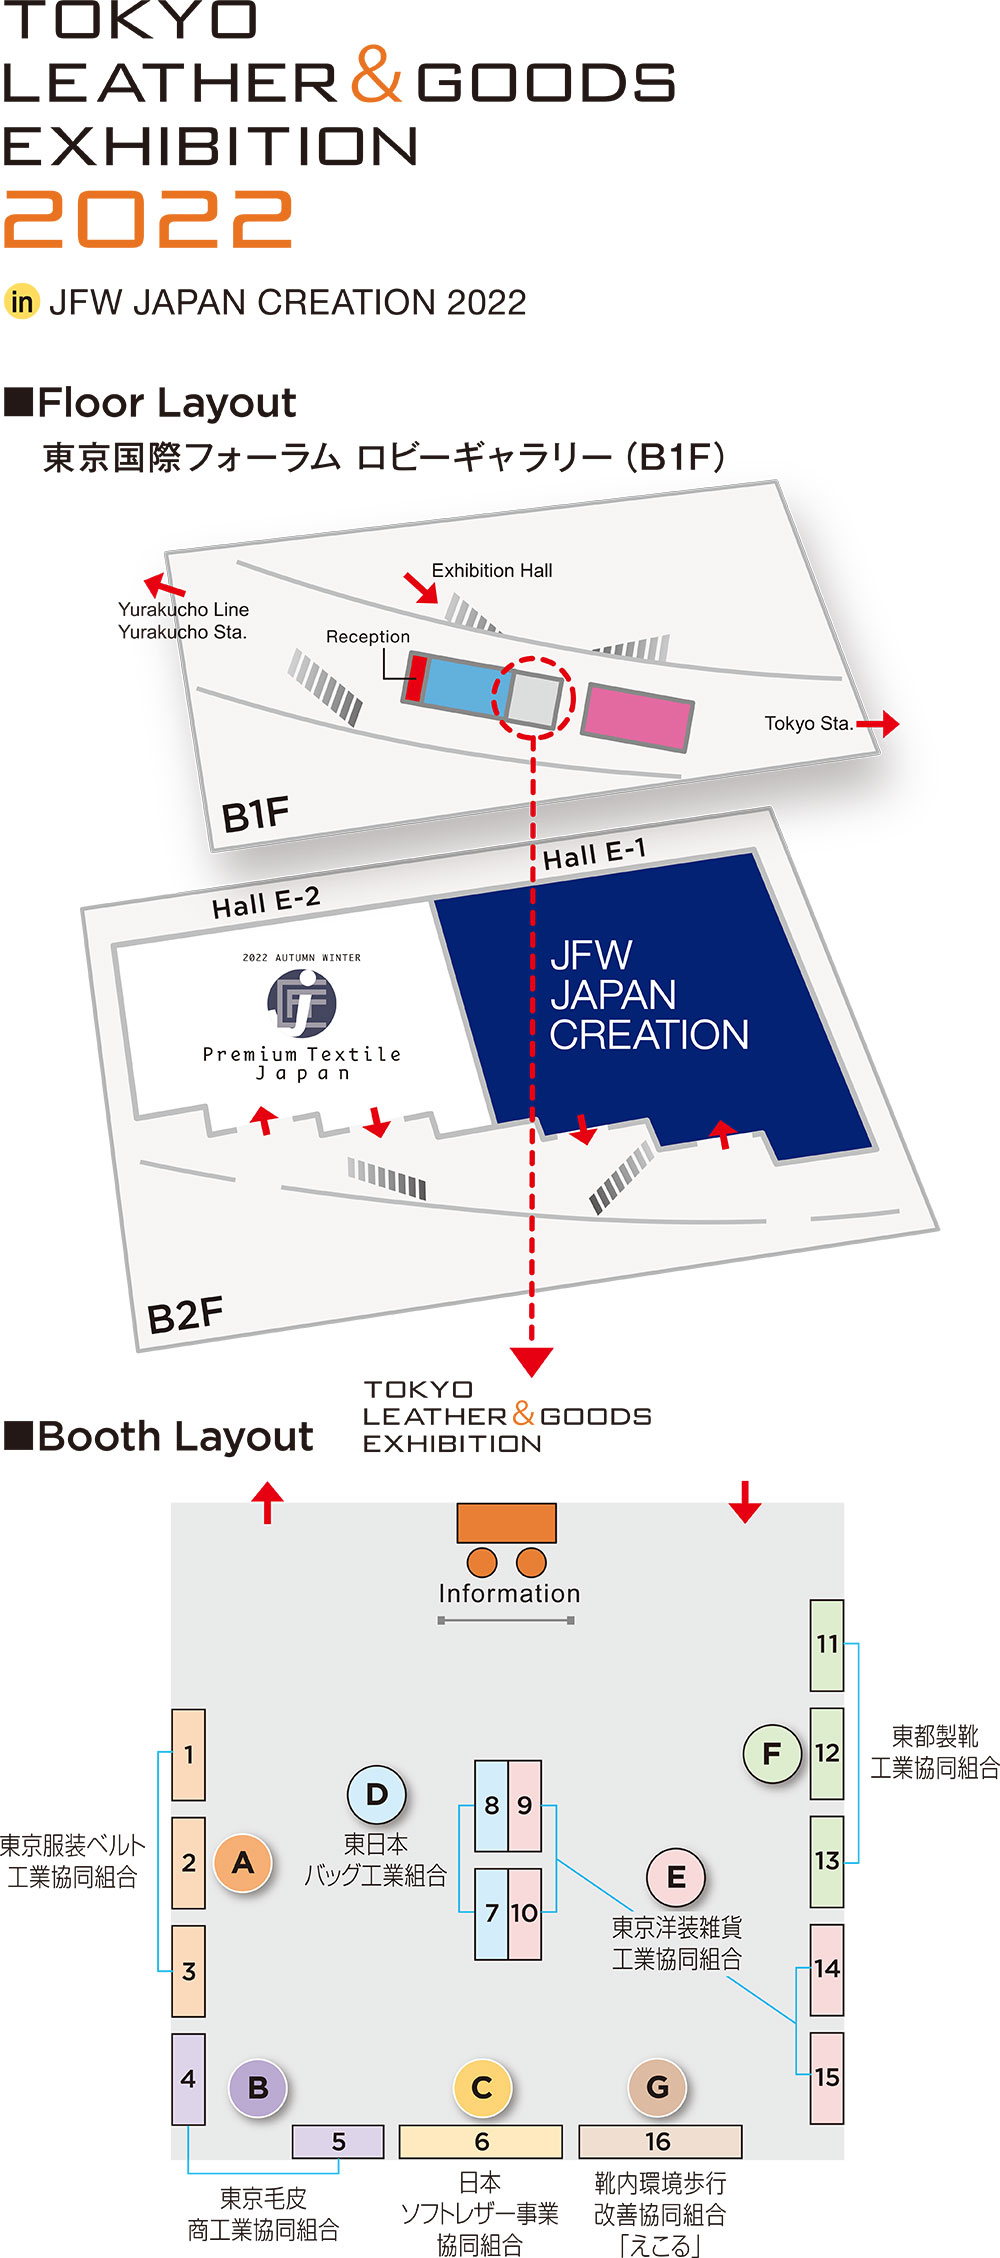 Floor Layout / Booth Layout